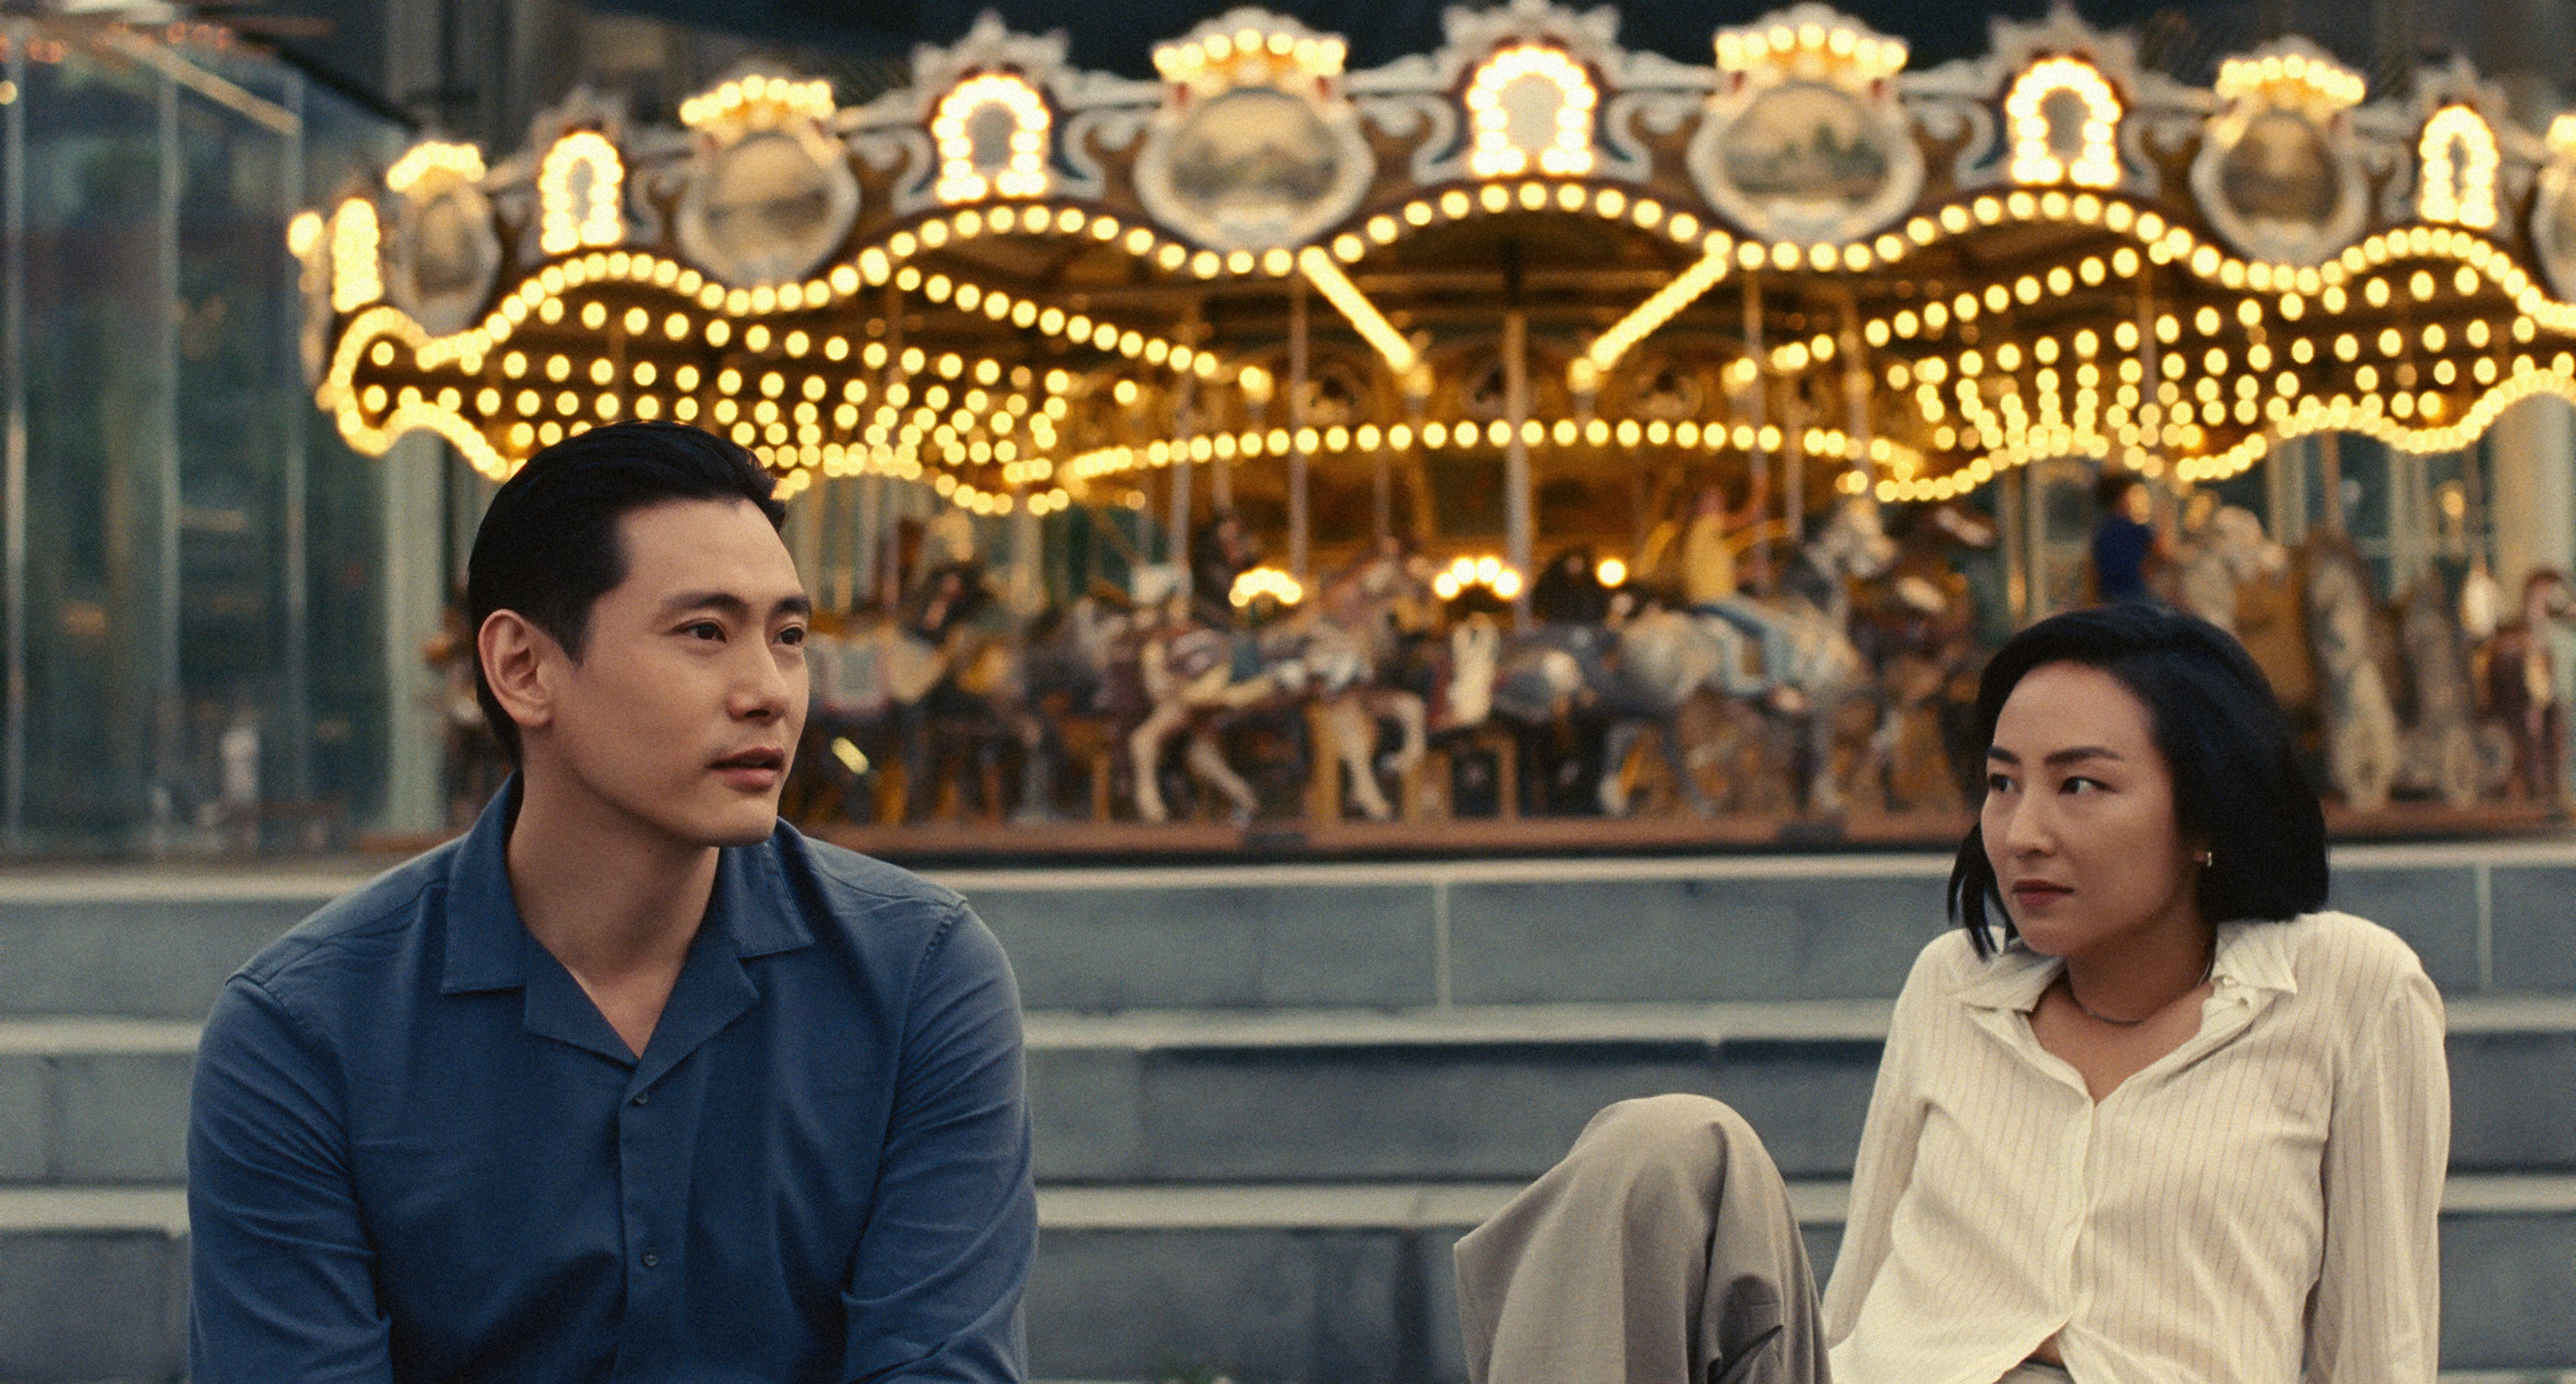 Modern Romance Film "PAST LIVES" is Coming to Philippine Cinemas on August 30